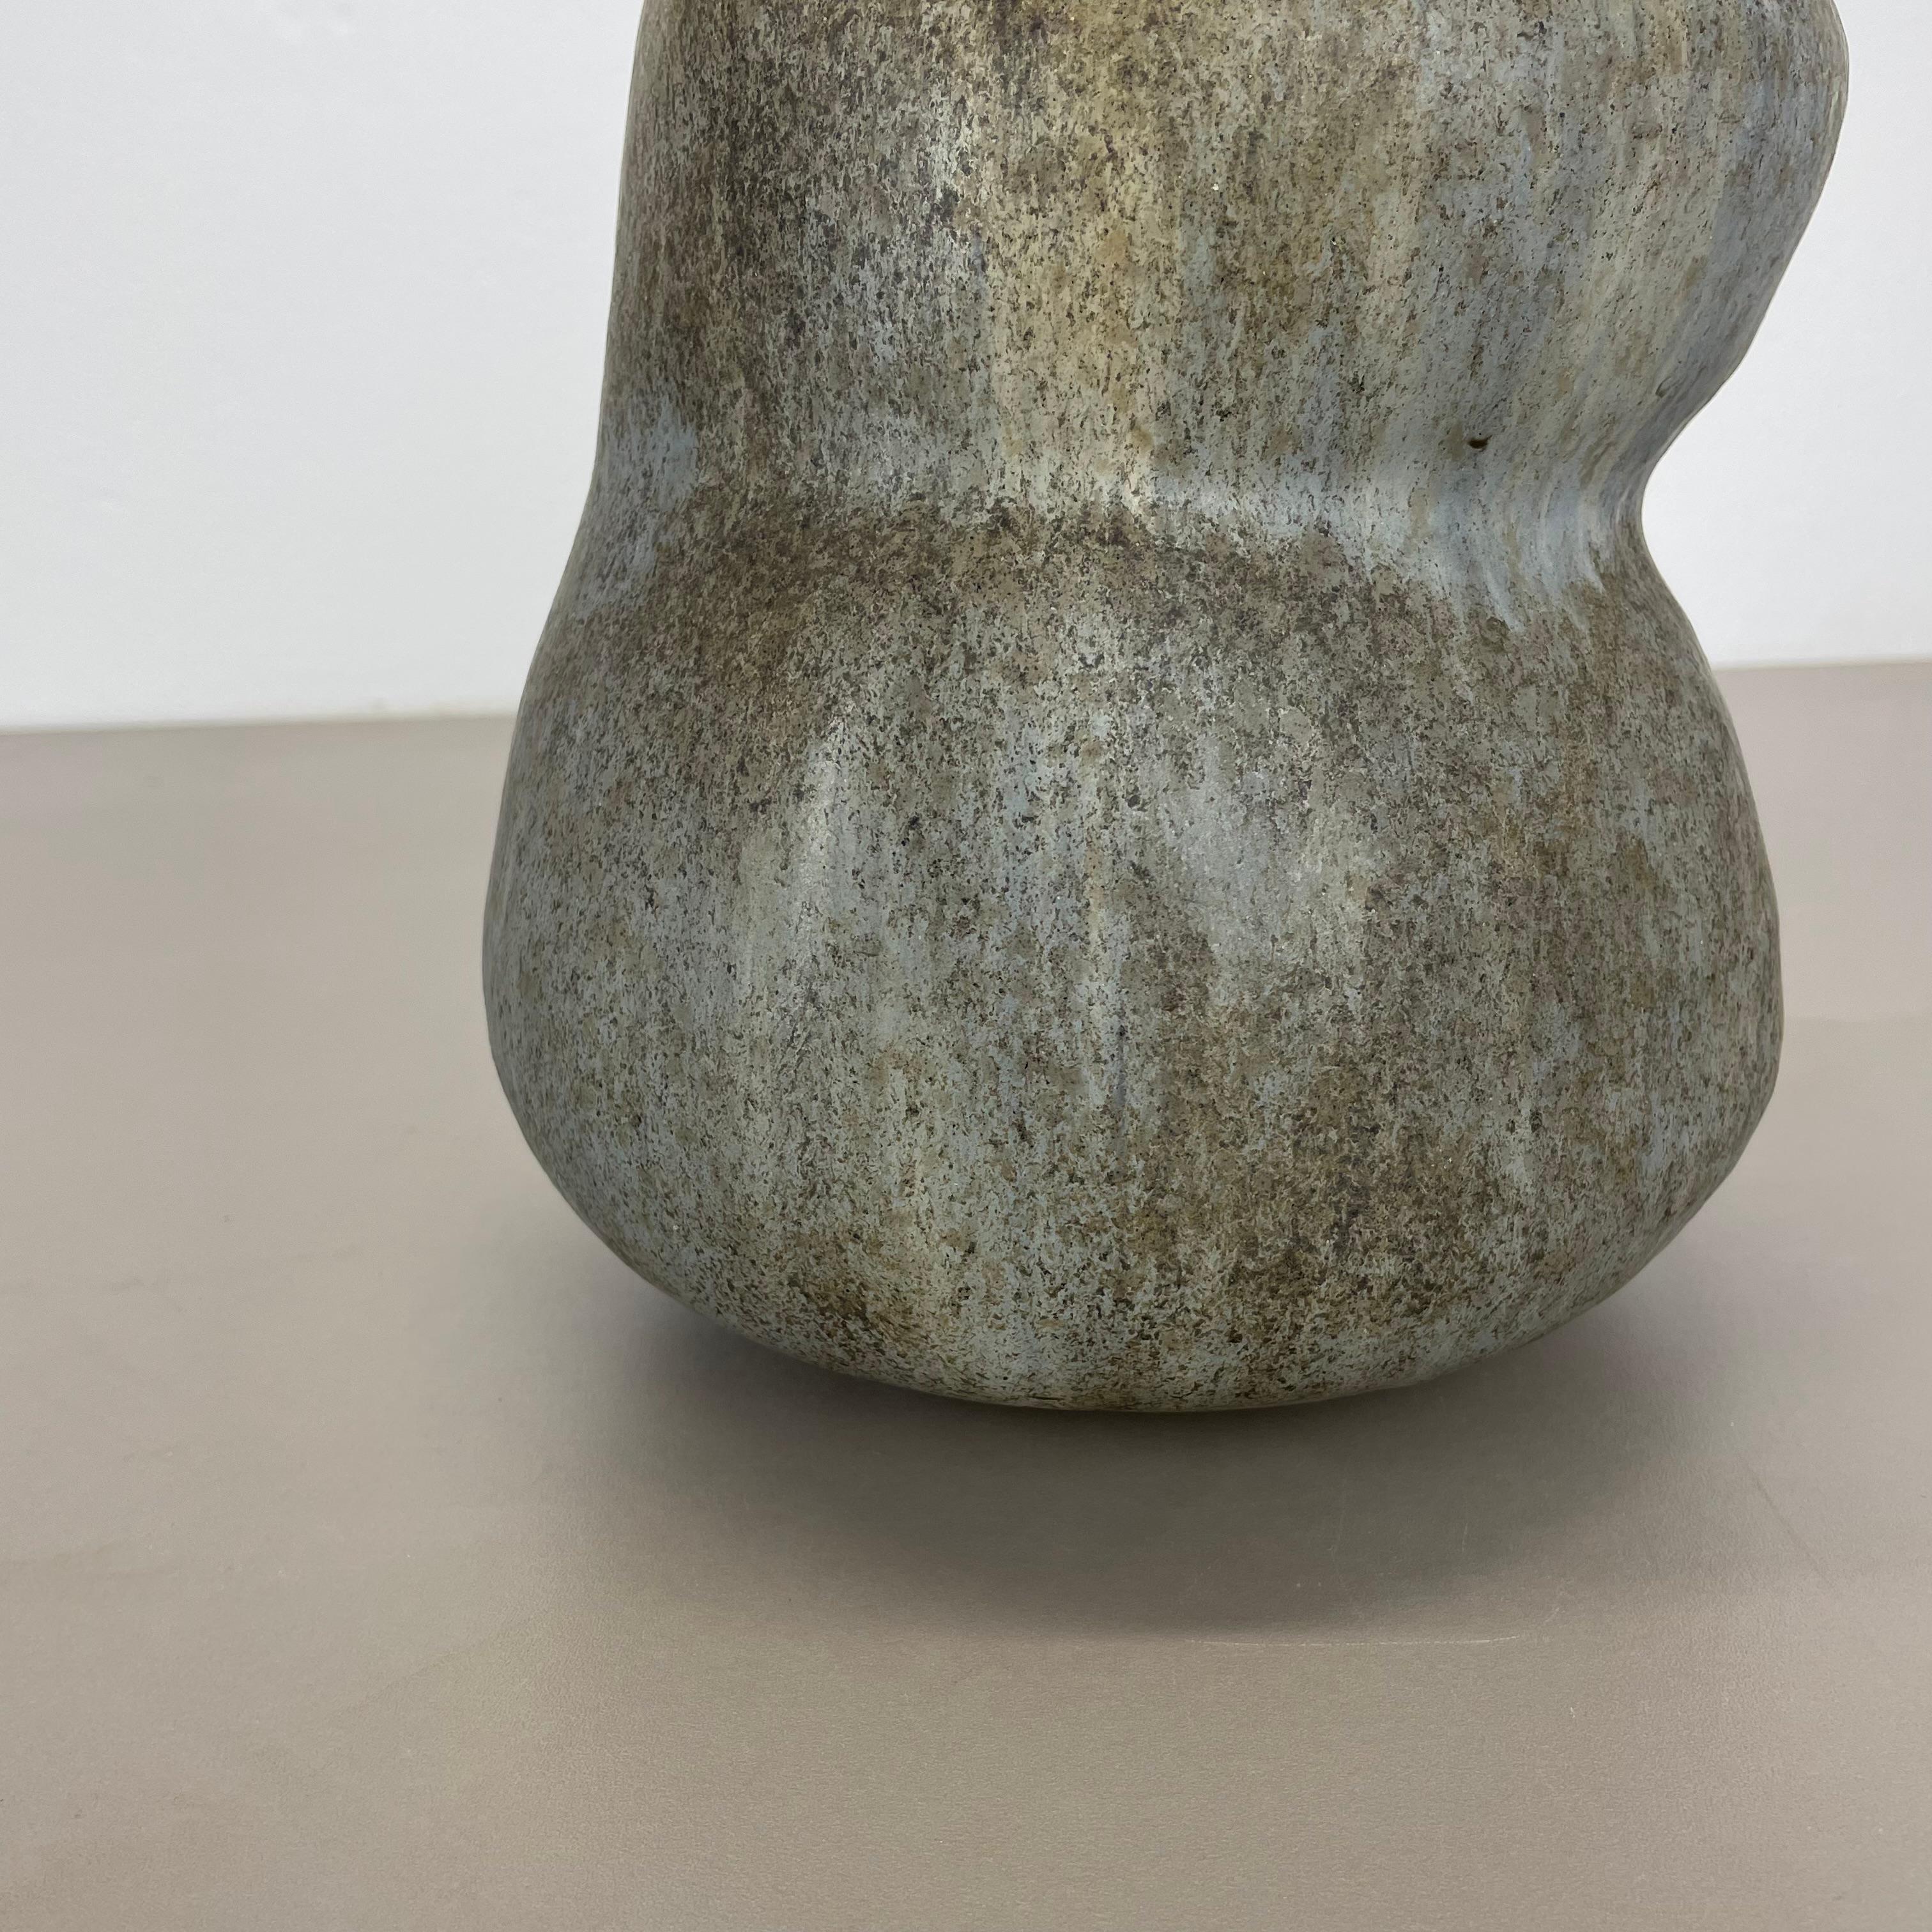 XL Sculptural Studio Pottery Vase Object, Otto Meier, Worpswede, Germany, 1960s For Sale 10